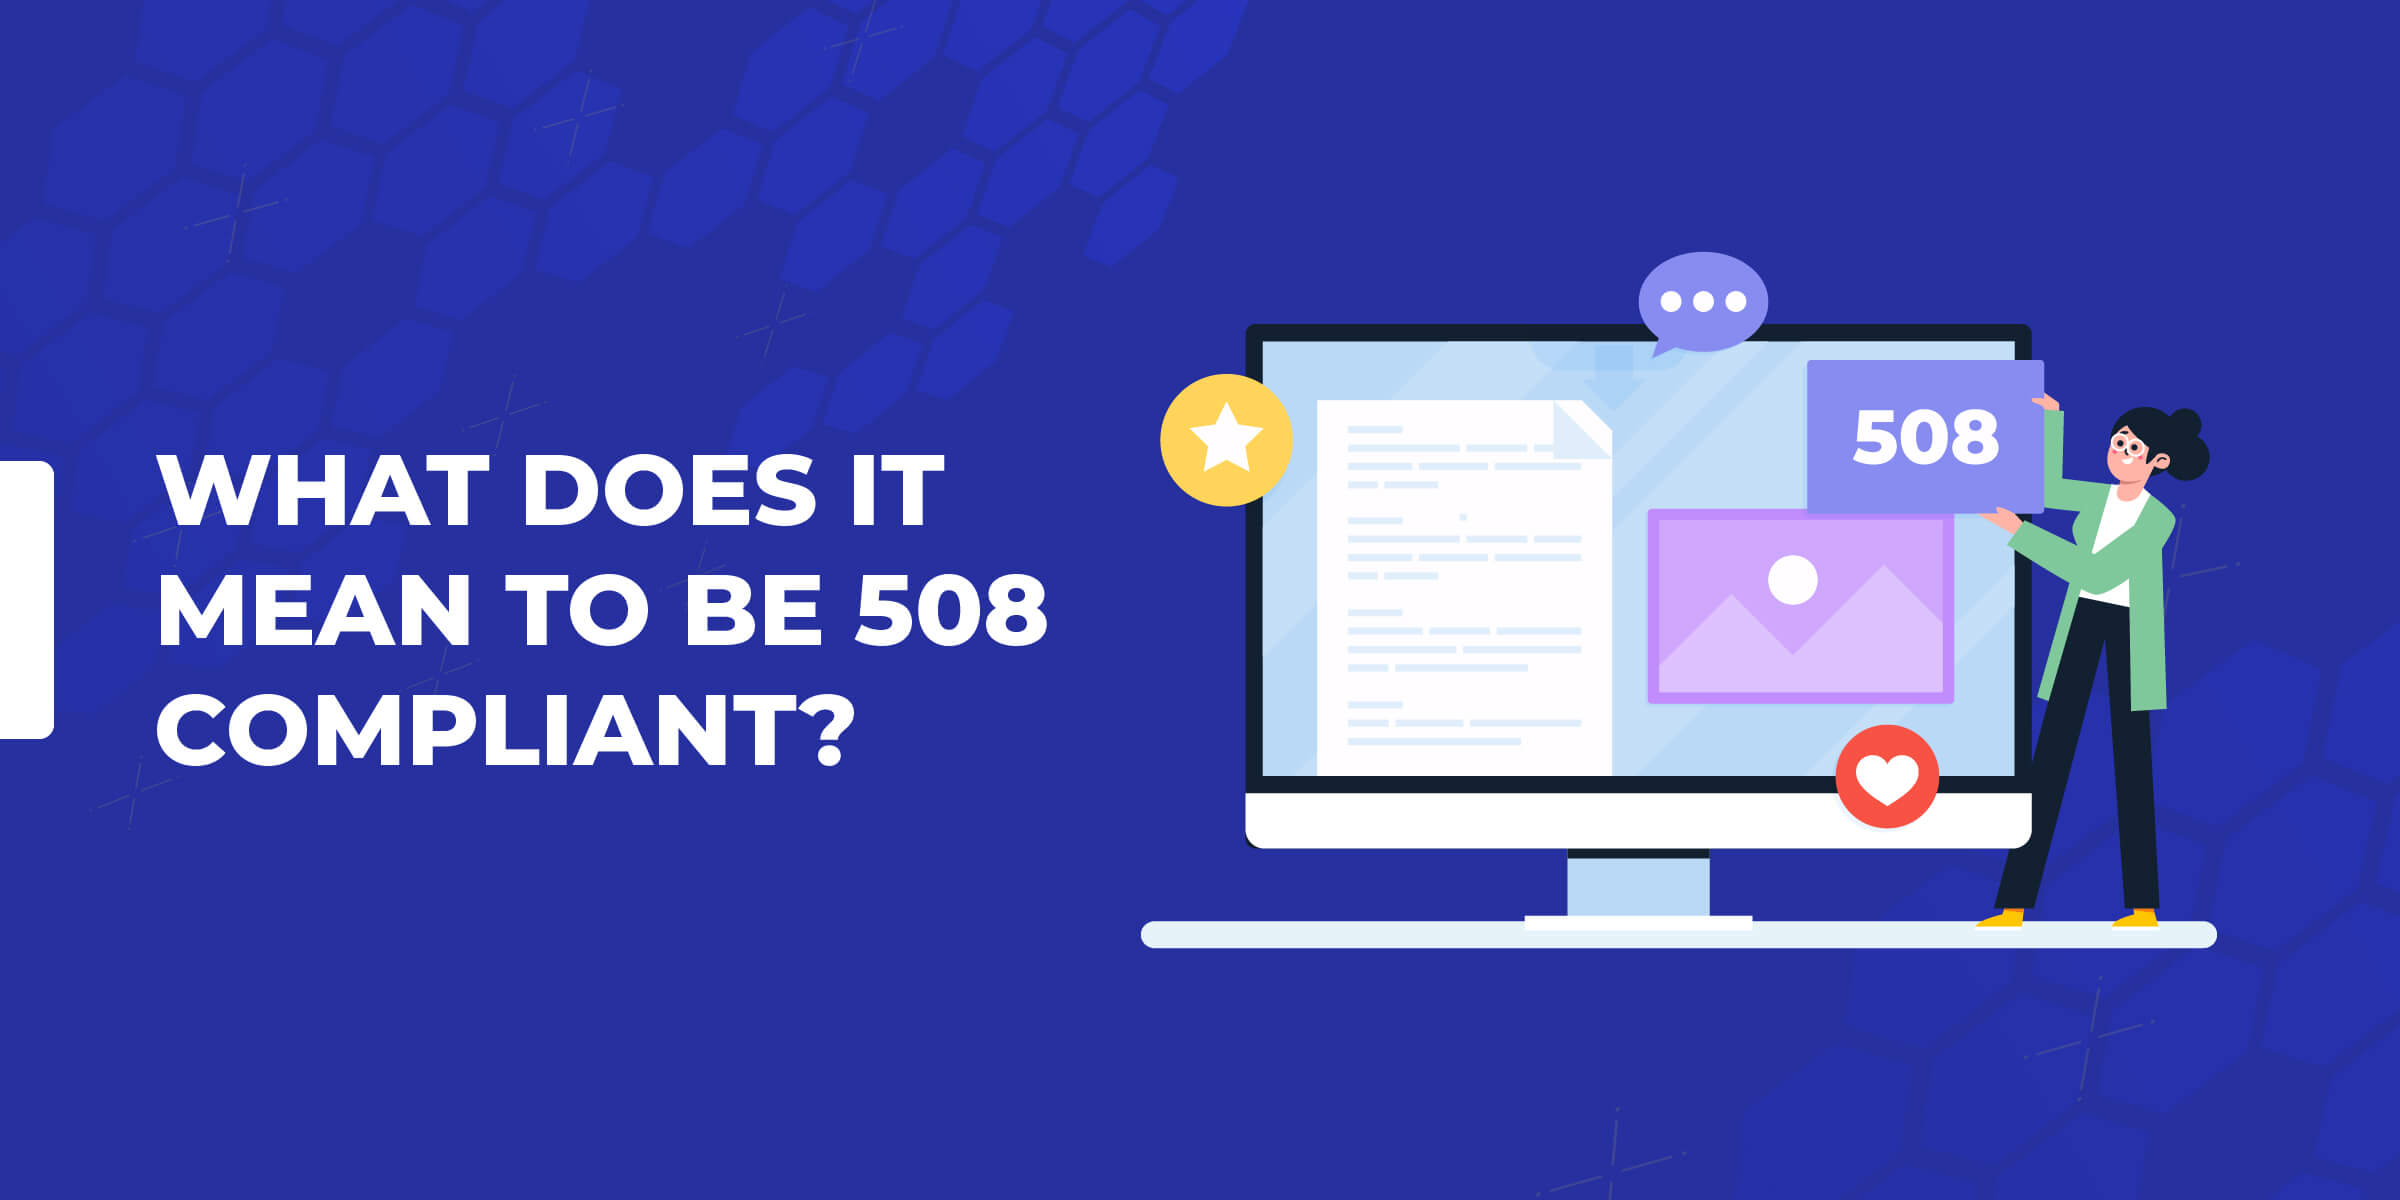 What Does It Mean to be 508 Compliant